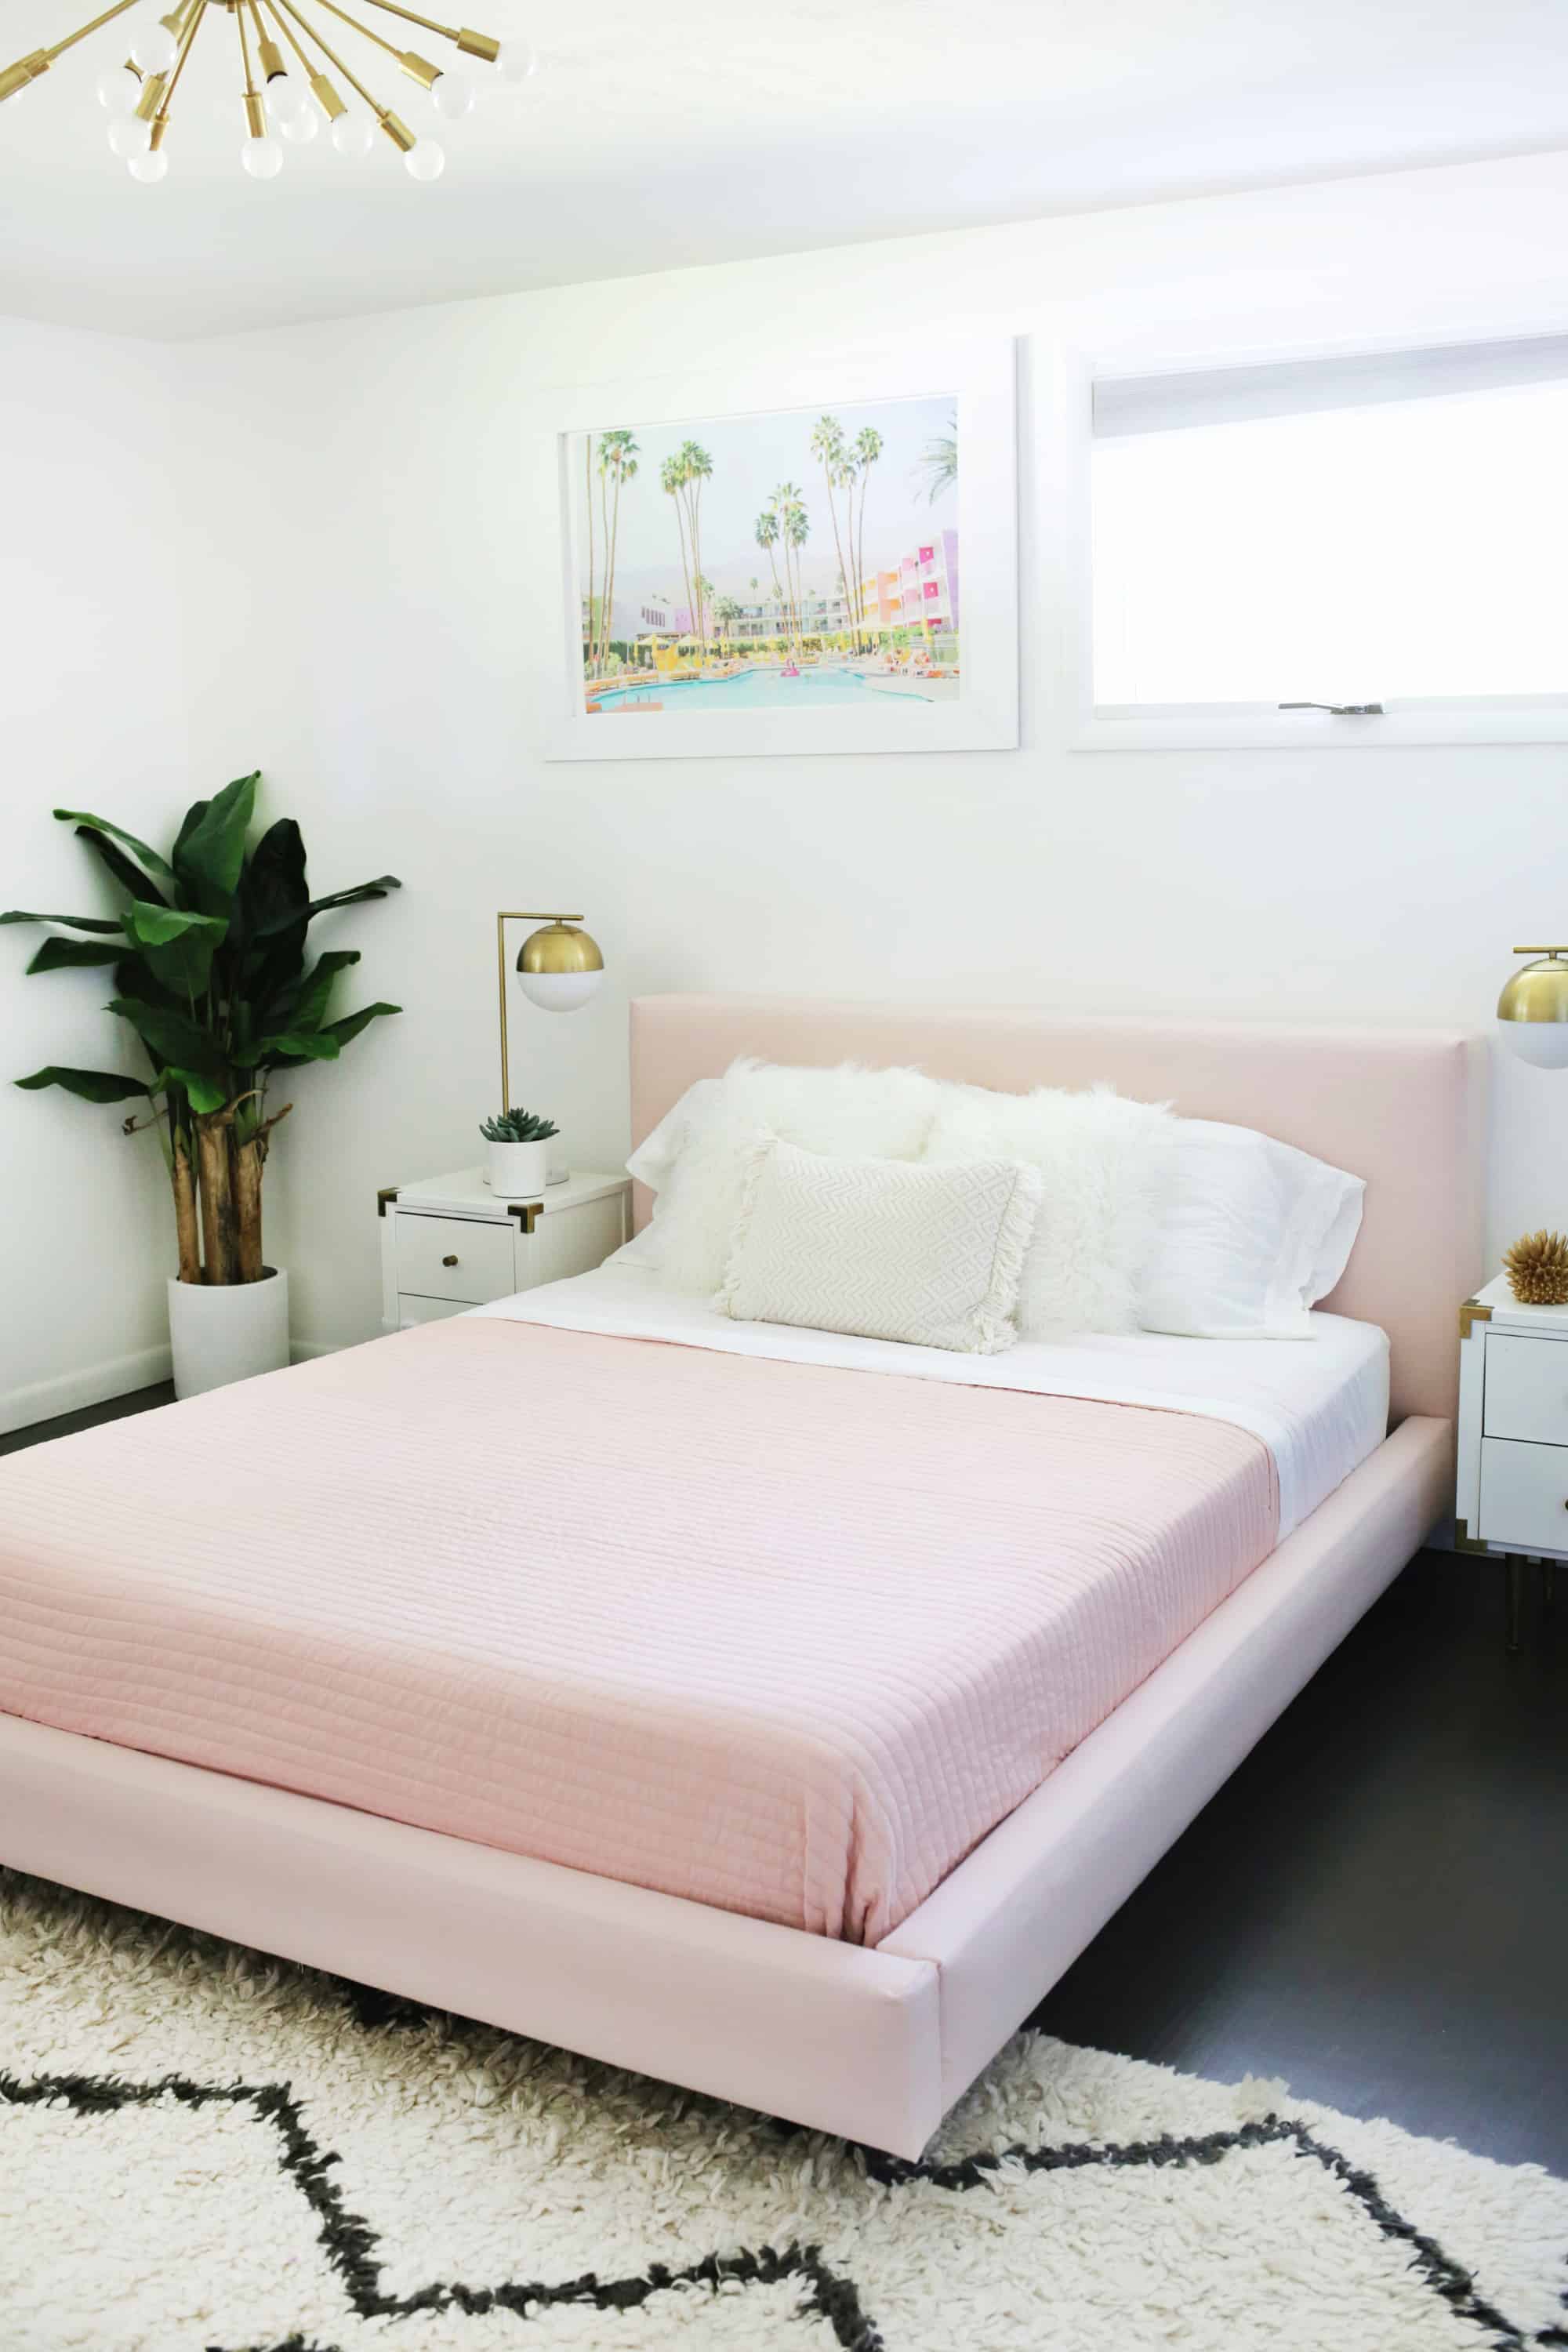 Reupholster Your Bed Frame In One, Mattress Directly On Bed Frame